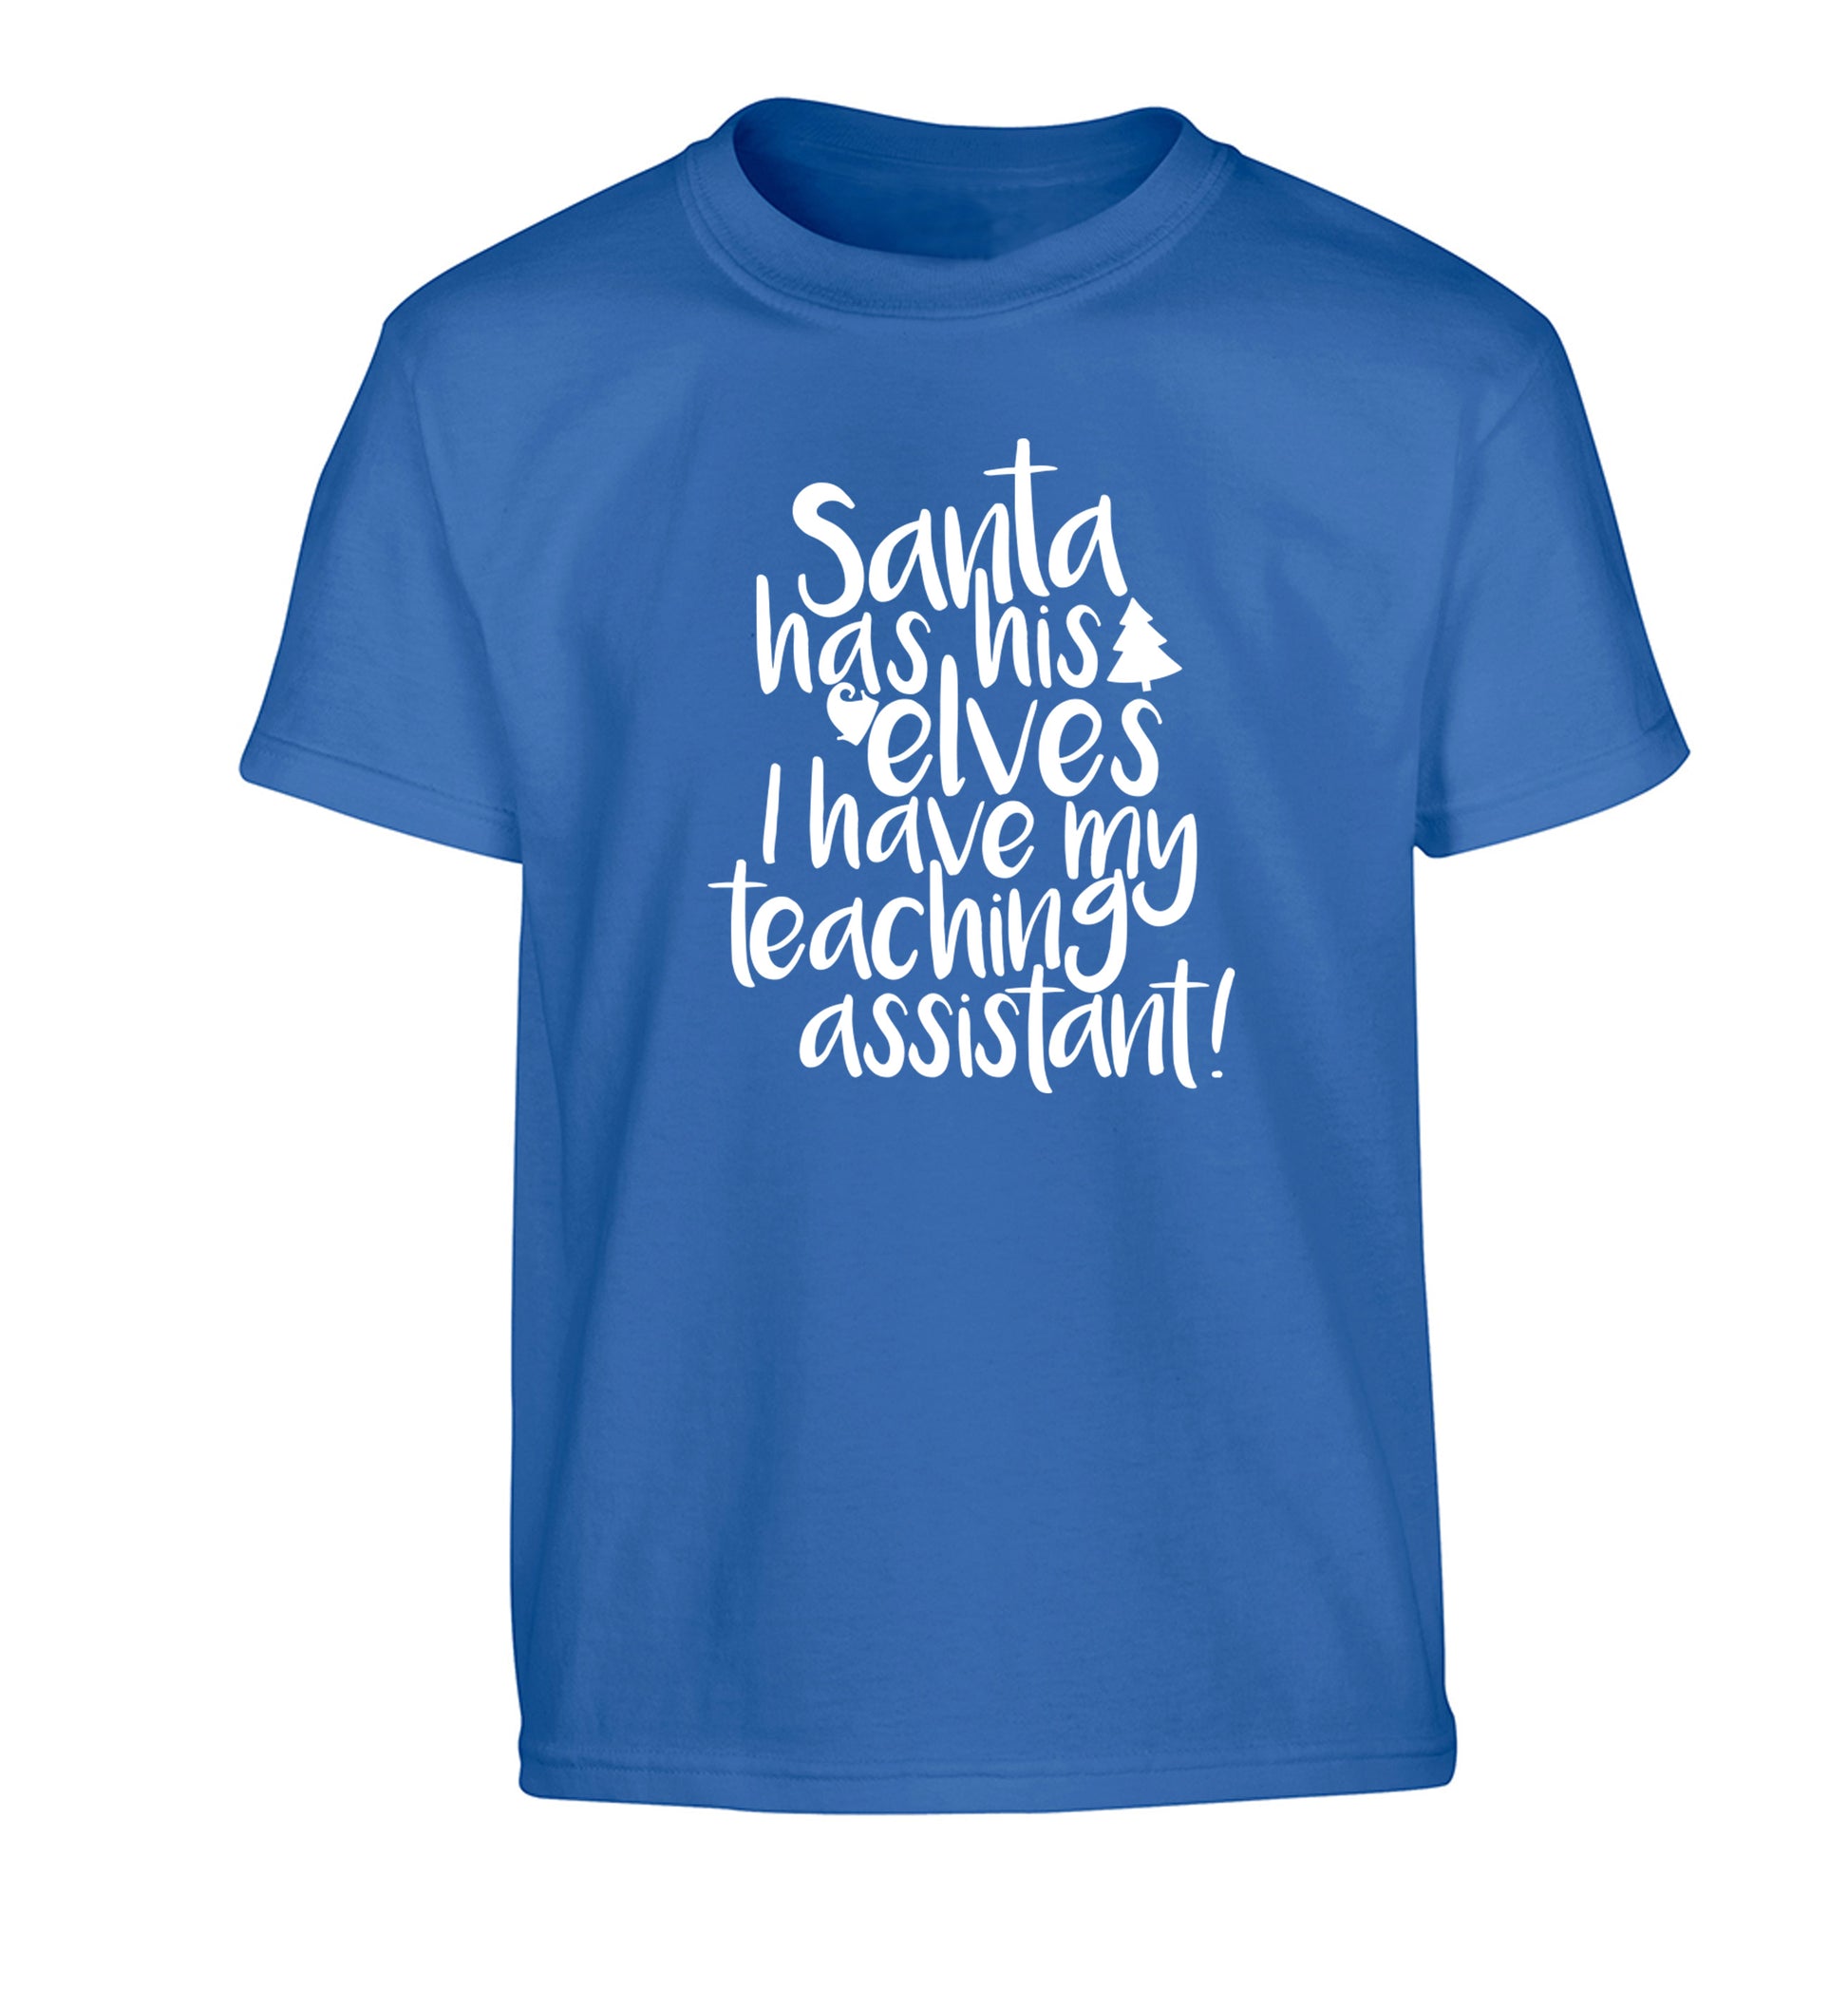 Santa has his elves I have my teaching assistant Children's blue Tshirt 12-14 Years